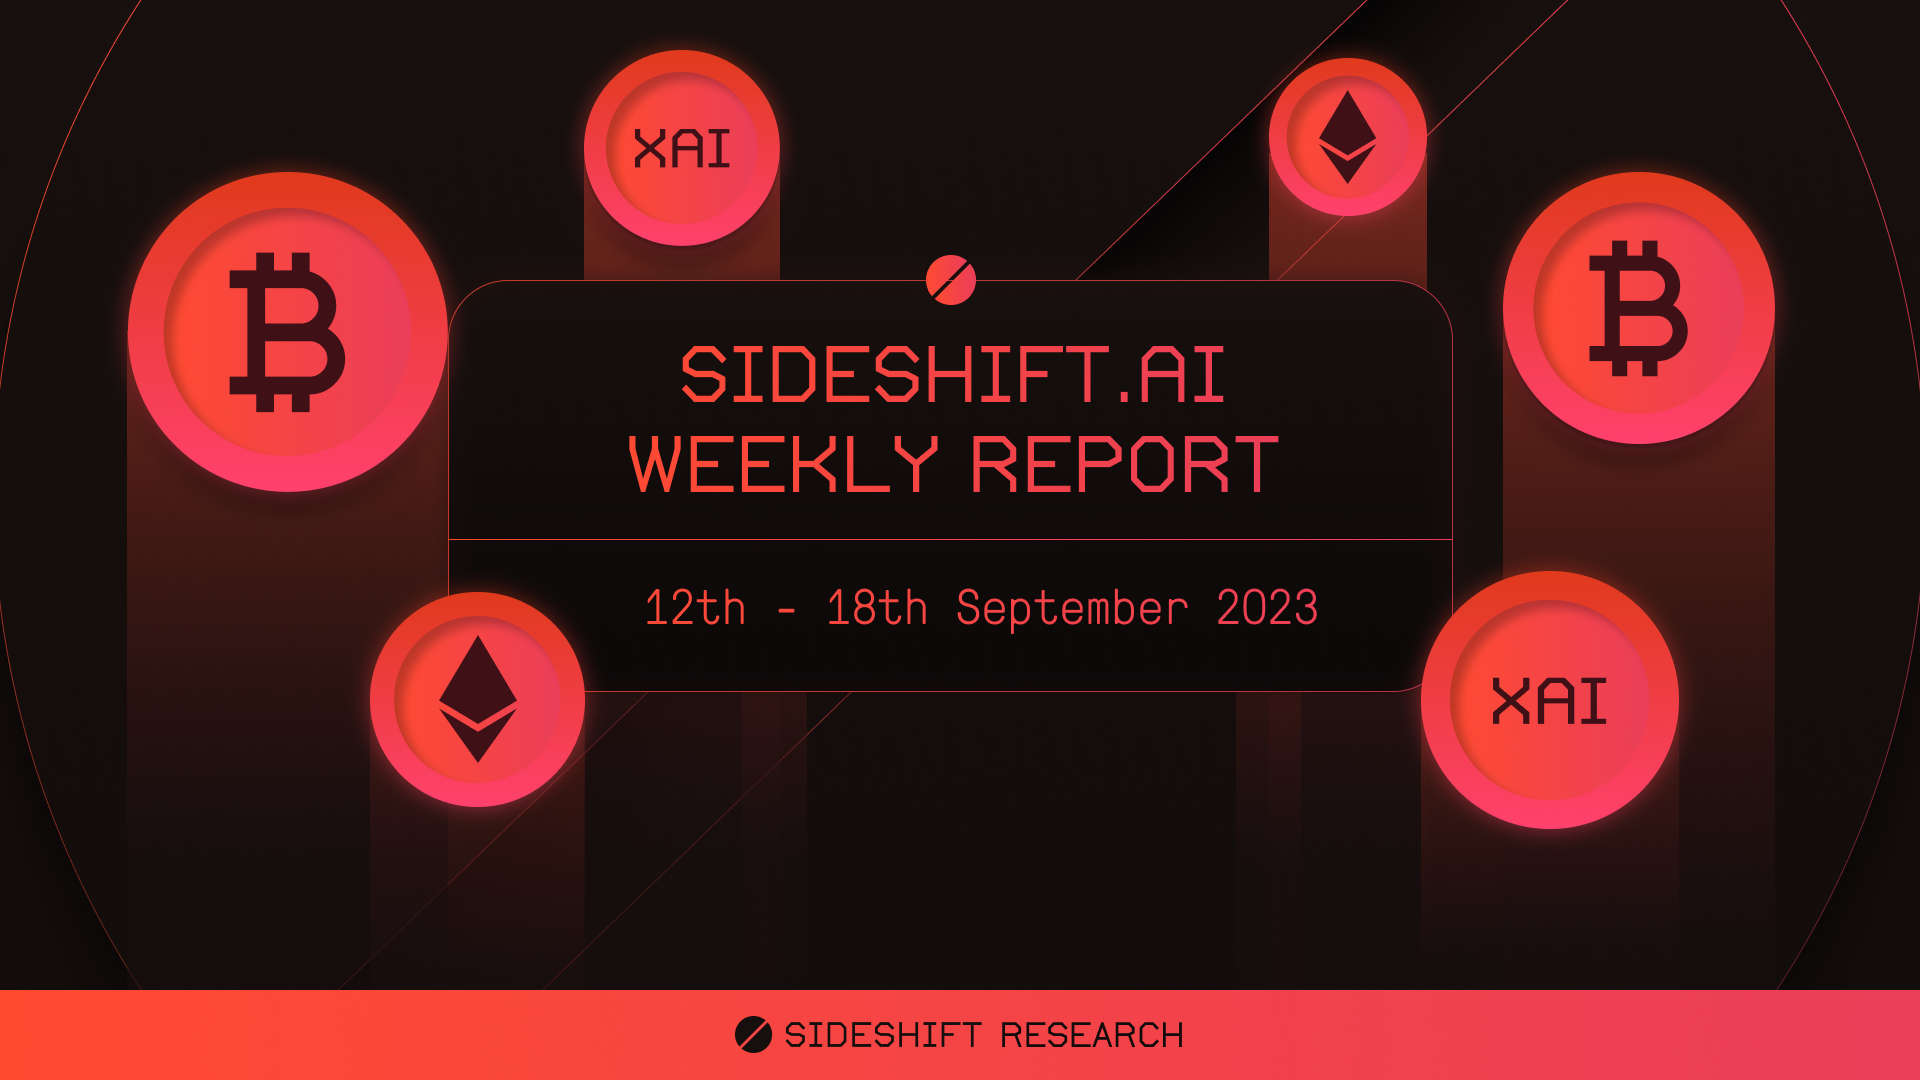 SideShift.ai Weekly Report | 12th - 18th September 2023